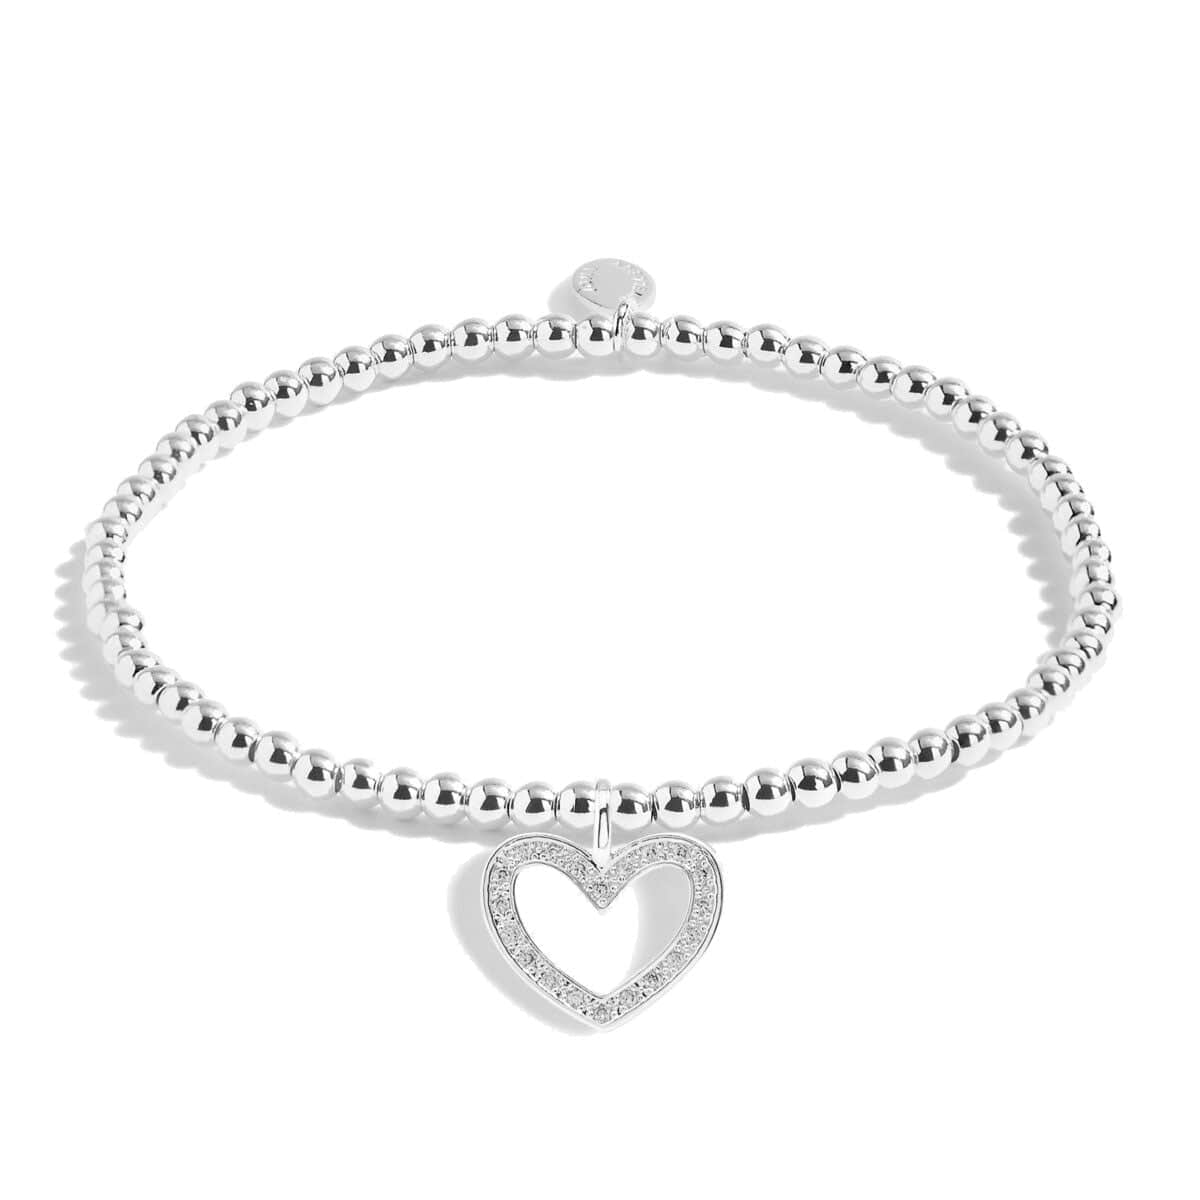 Joma Jewellery Boxed Bracelets Joma Jewellery Bridal From The Heart 'Beautiful Maid of Honour' Bracelet Gift Box